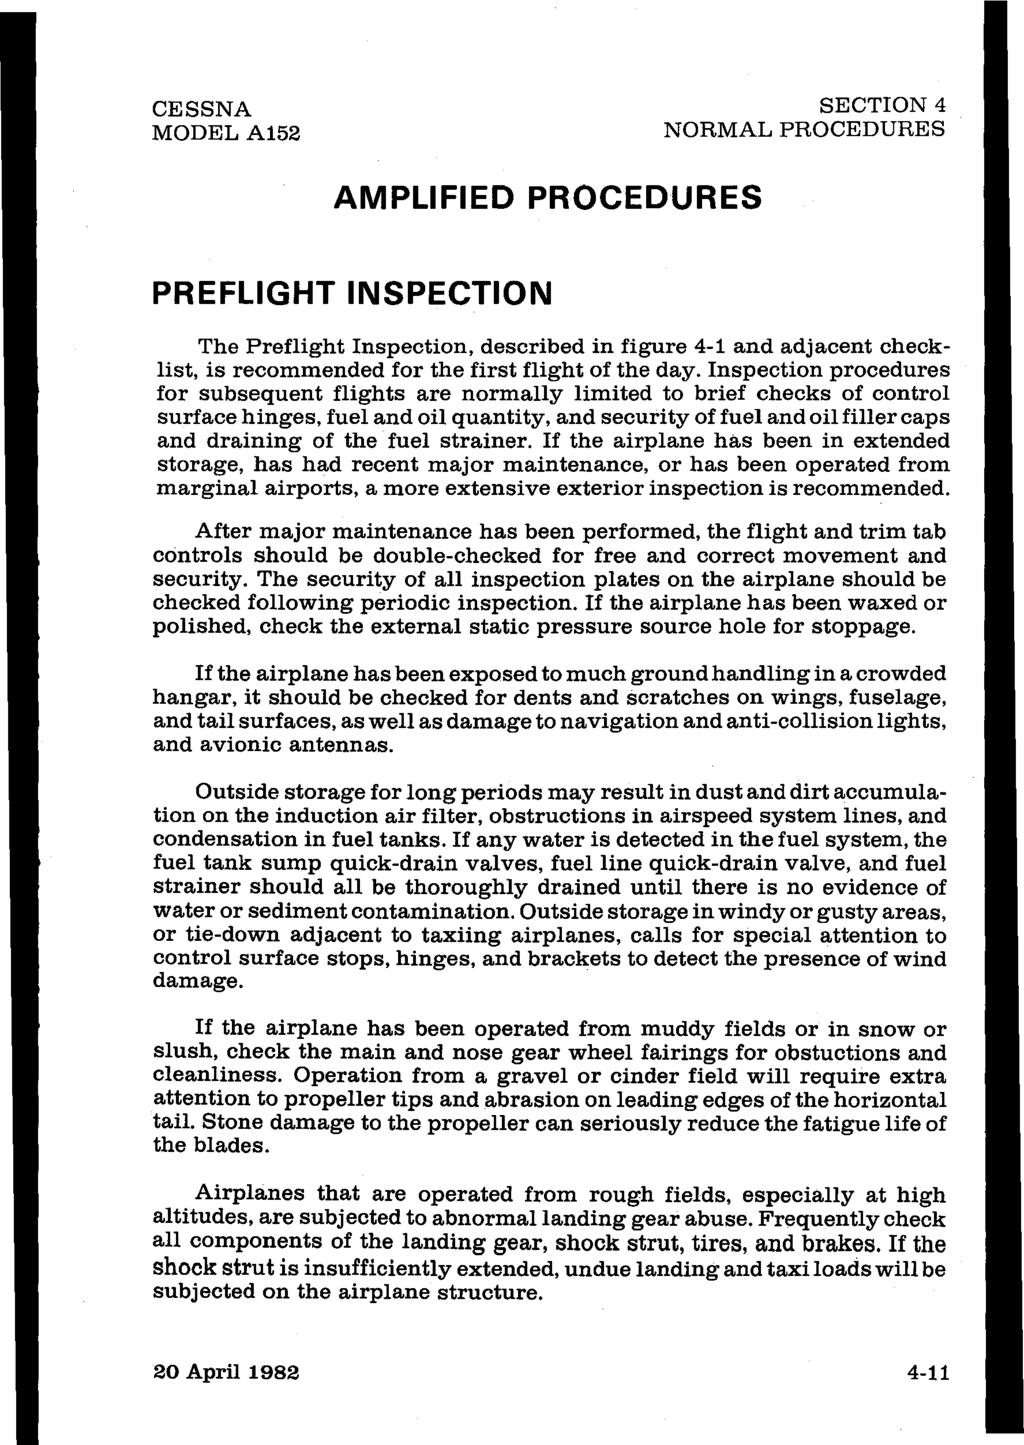 CESSNA MODEL A152 SECTION 4 NORMAL PROCEDURES AMPLIFIED PROCEDURES PREFLIGHT INSPECTION The Preflight Inspection, described in figure 4-1 and adjacent checklist, is recommended for the first flight